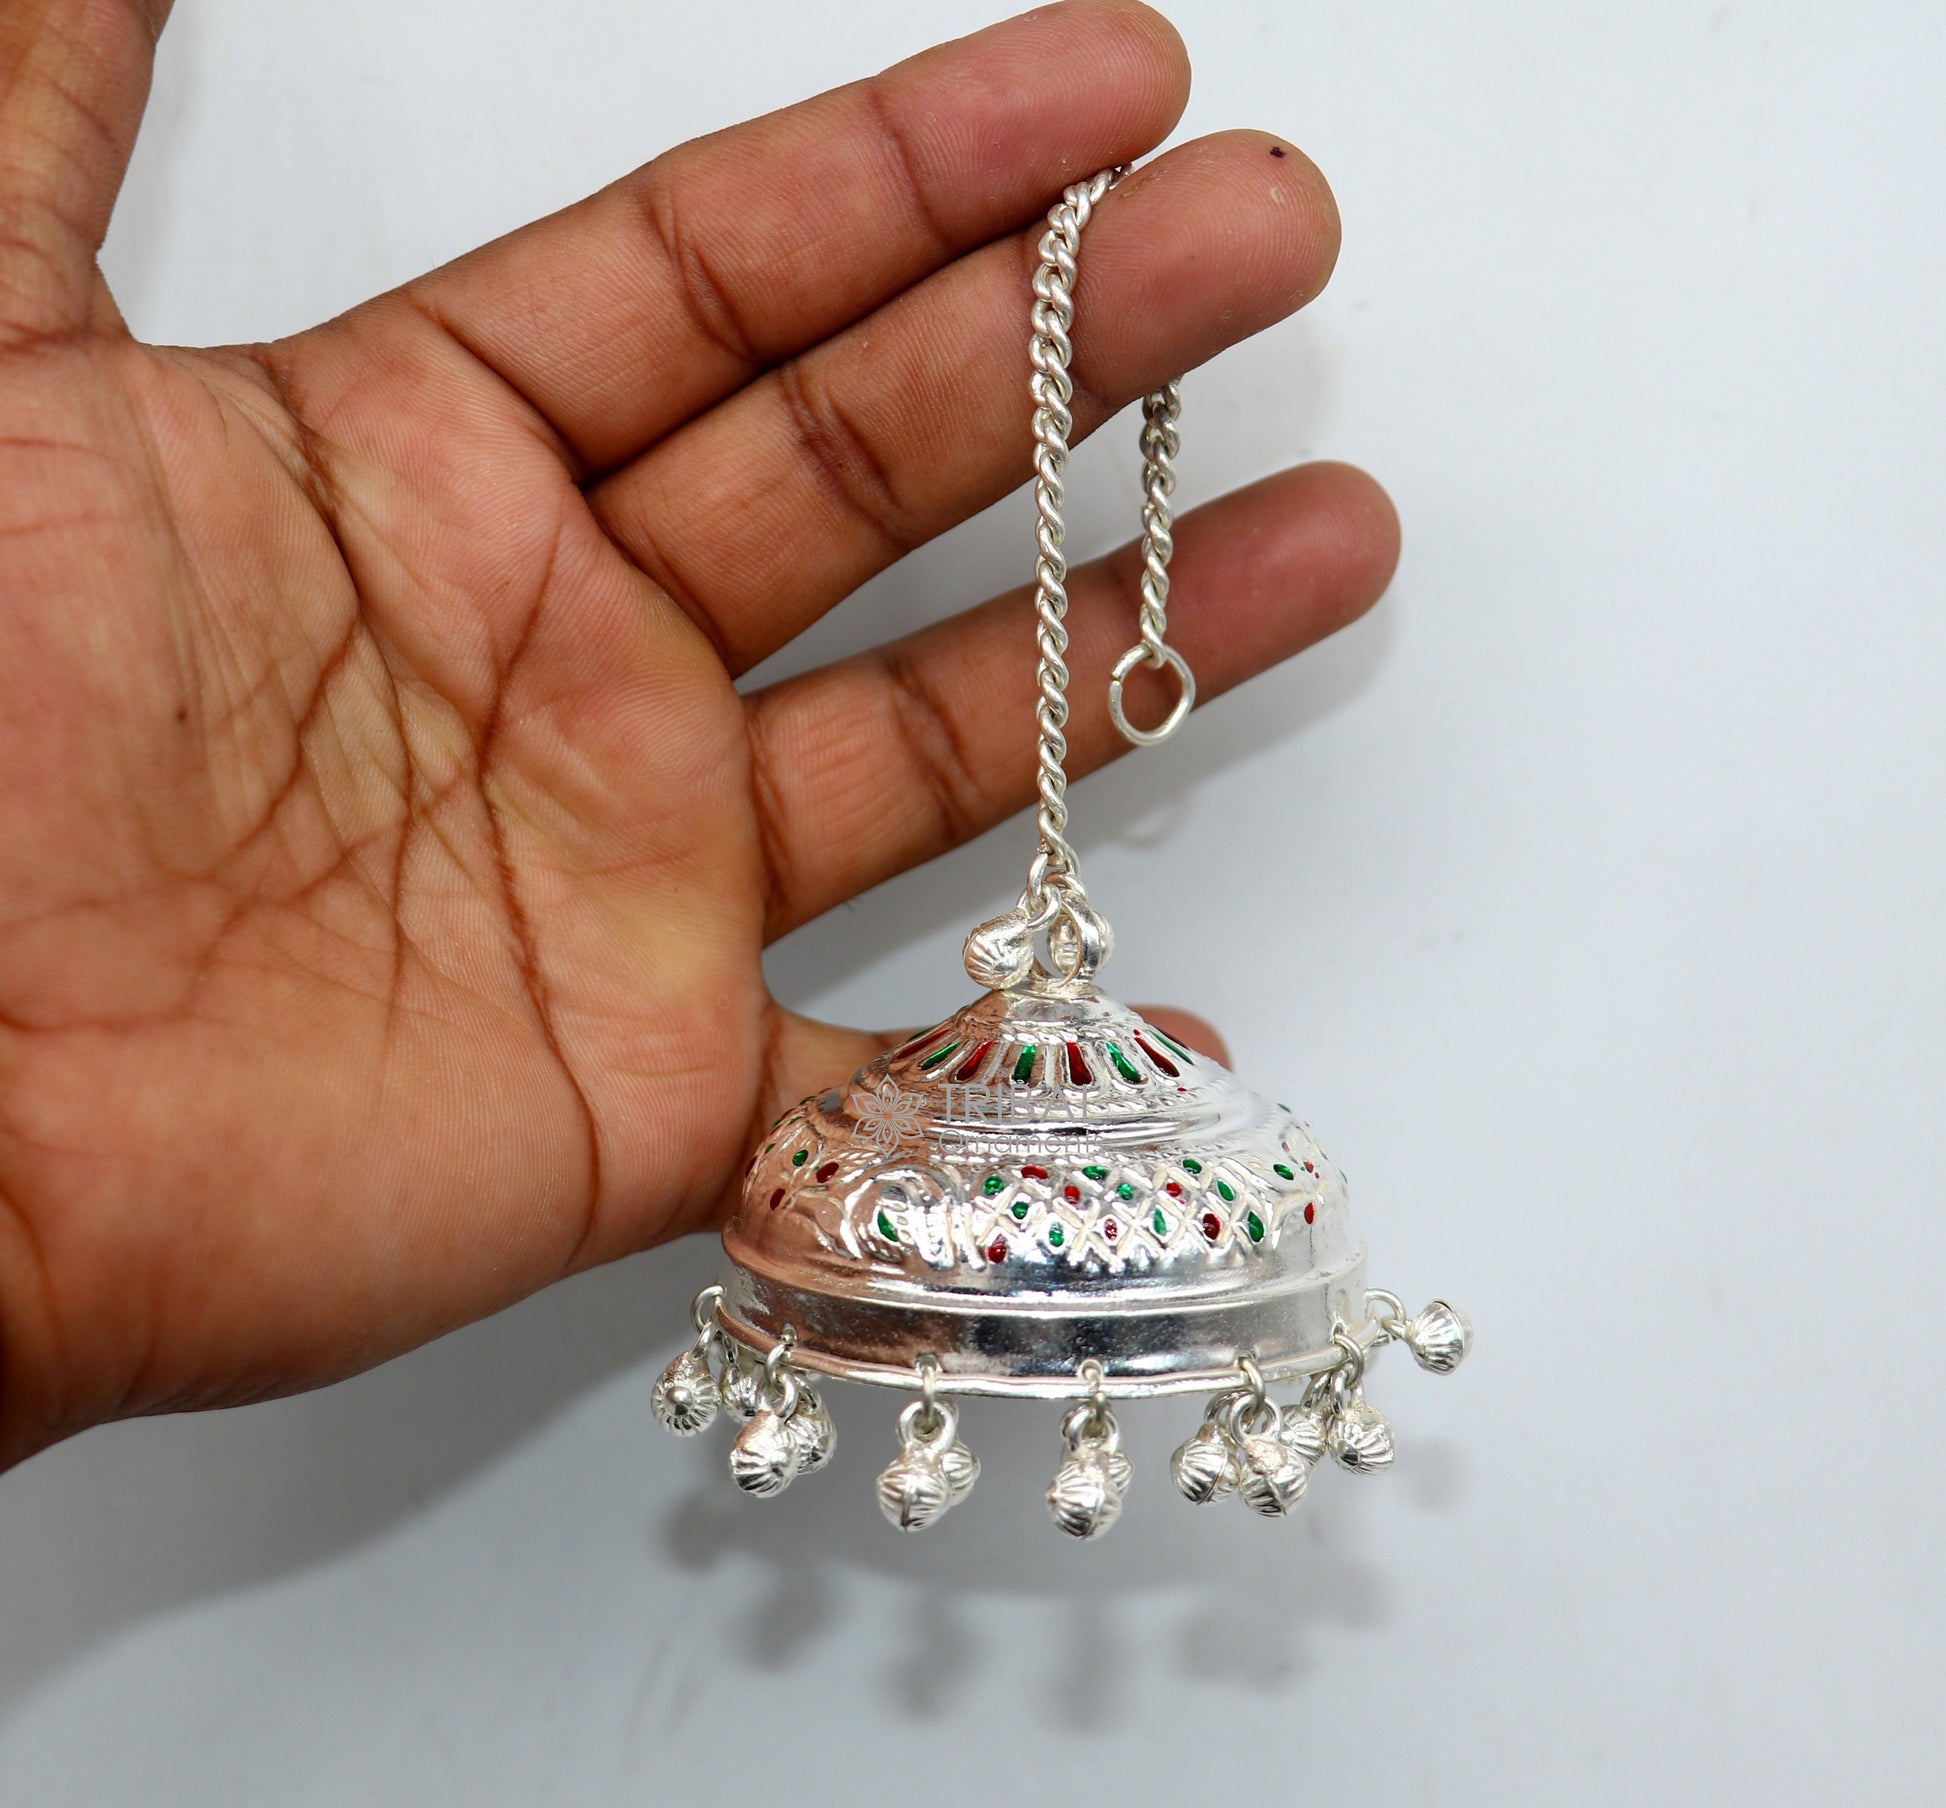 925 sterling Silver chatter/chatar, silver umbrella god temple art, Silver chandelier for temple Puja worshipping utensils su1120 - TRIBAL ORNAMENTS